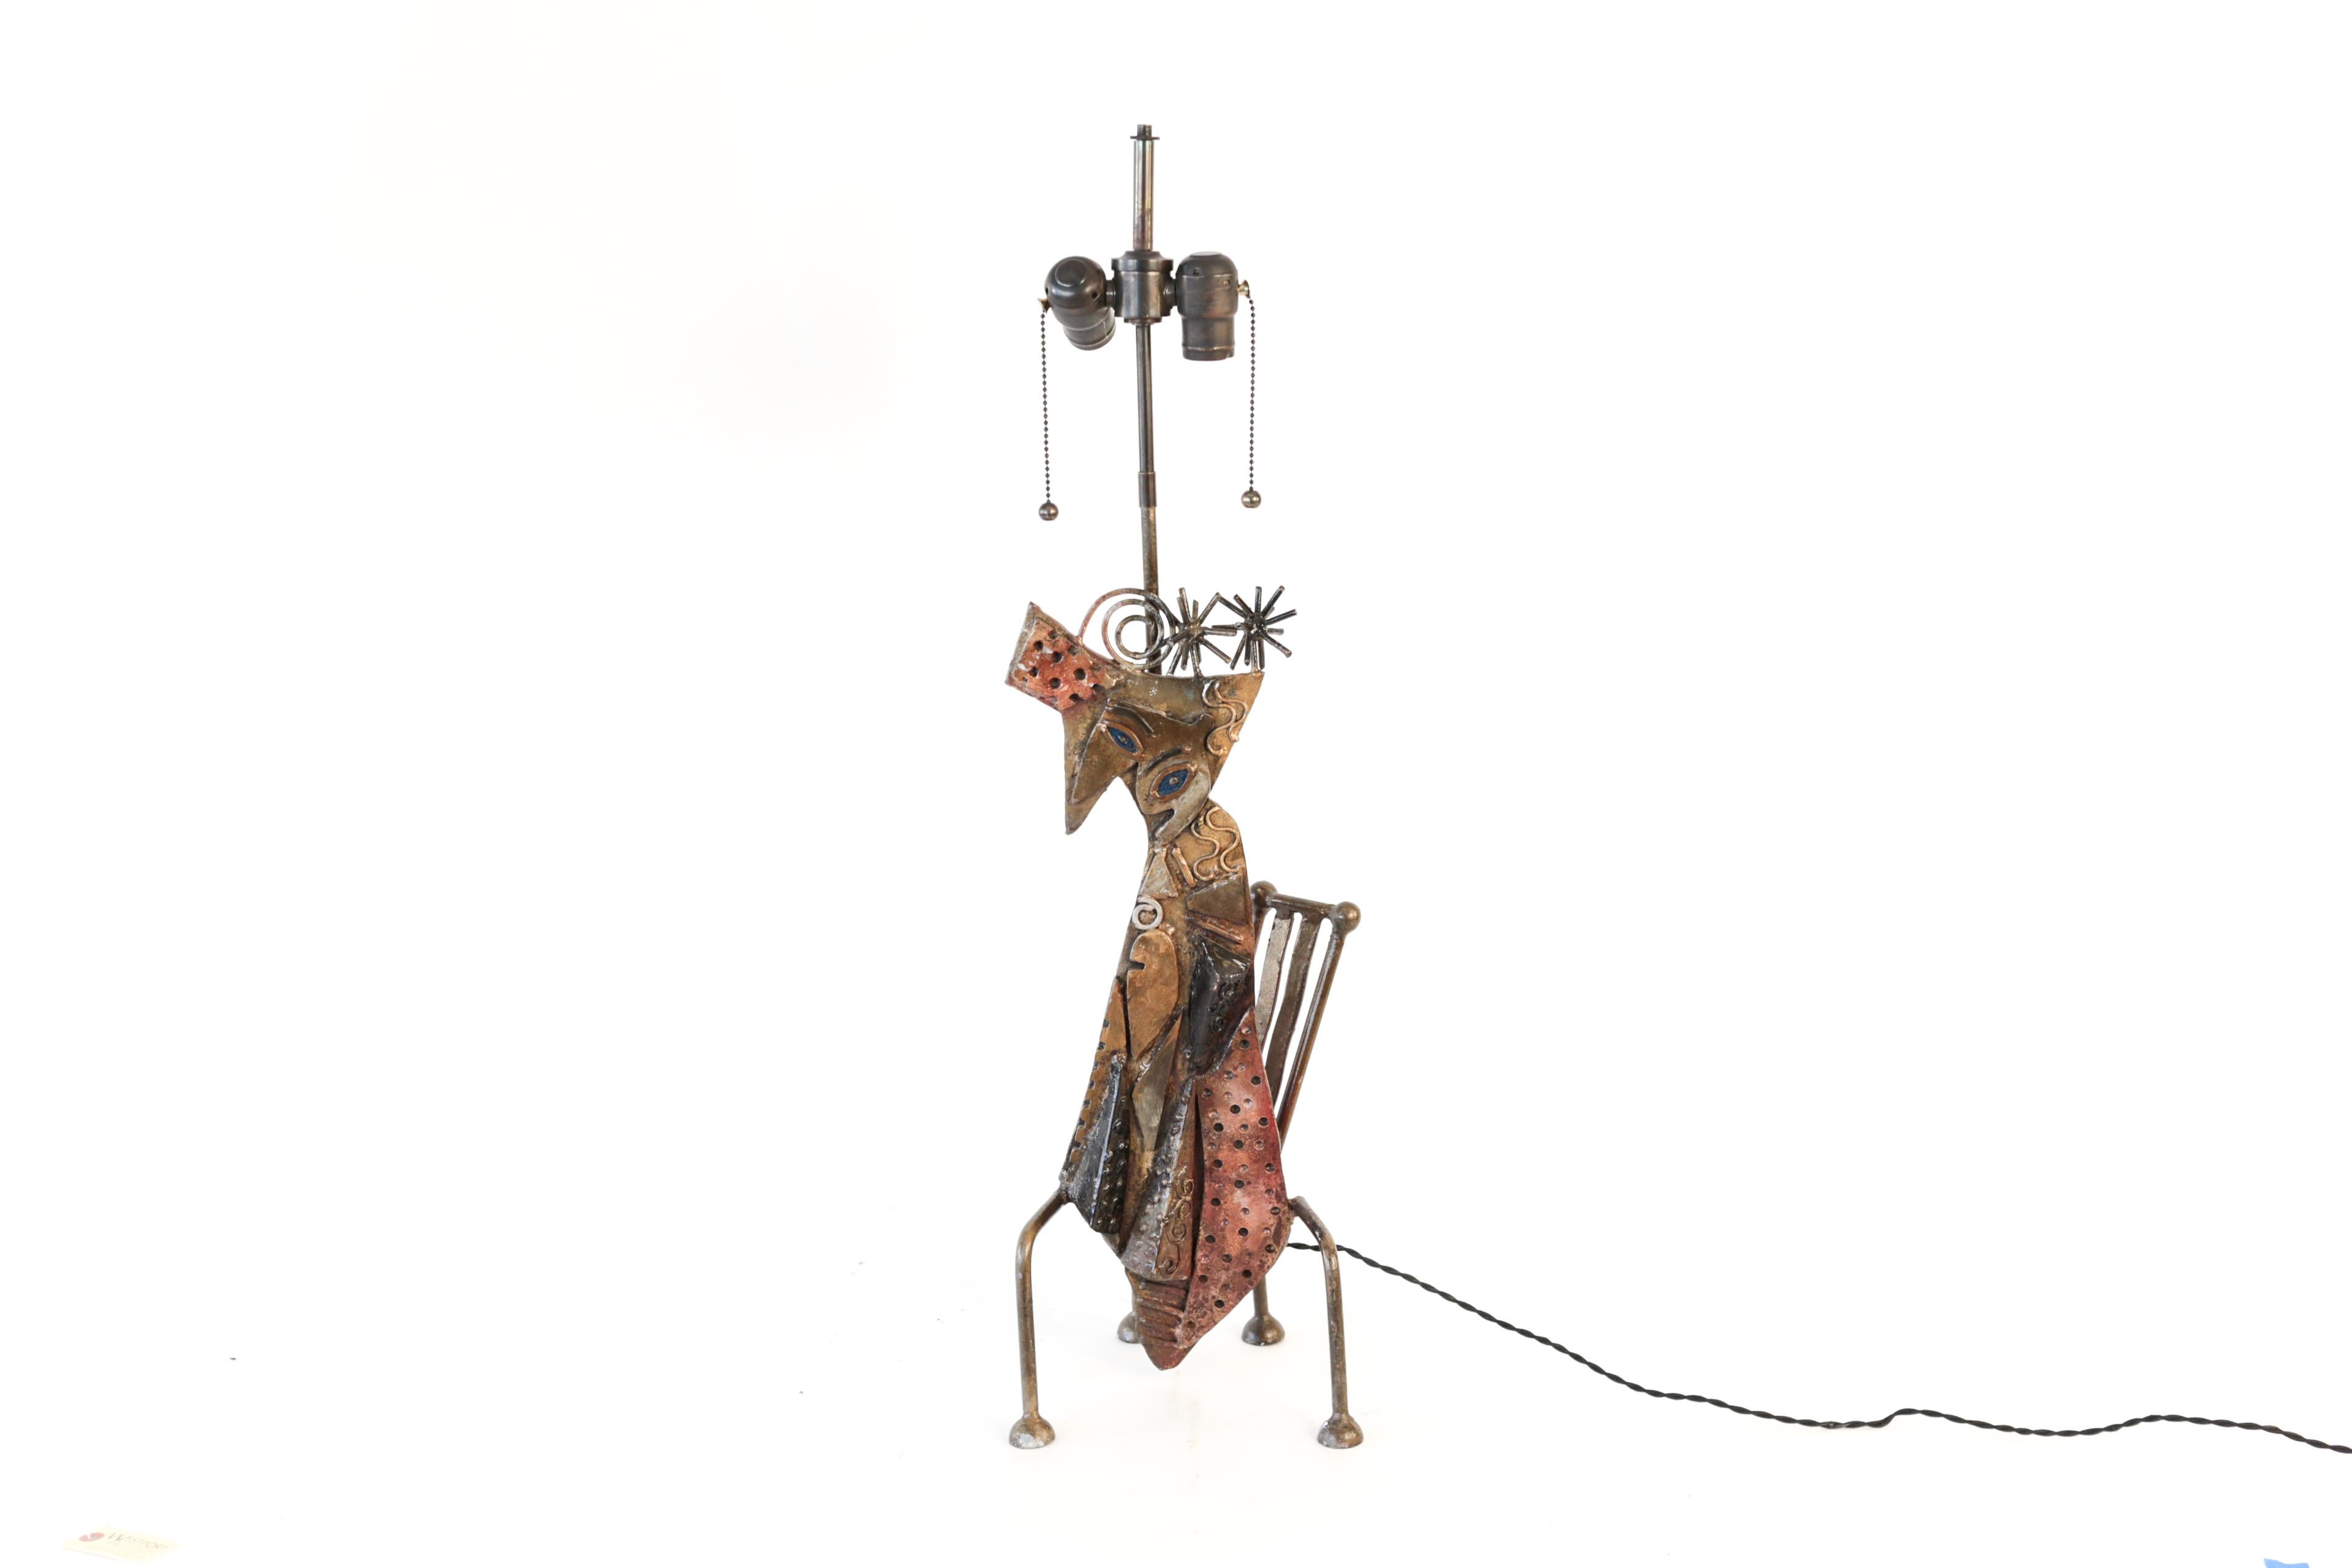 This whimsical handcrafted table lamp depicts a cat on a chair. When lit, the light plays over the textured metal and casts interesting shadows on the wall. With its new sockets and recent rewiring, this lamp is ready to be the newest addition to